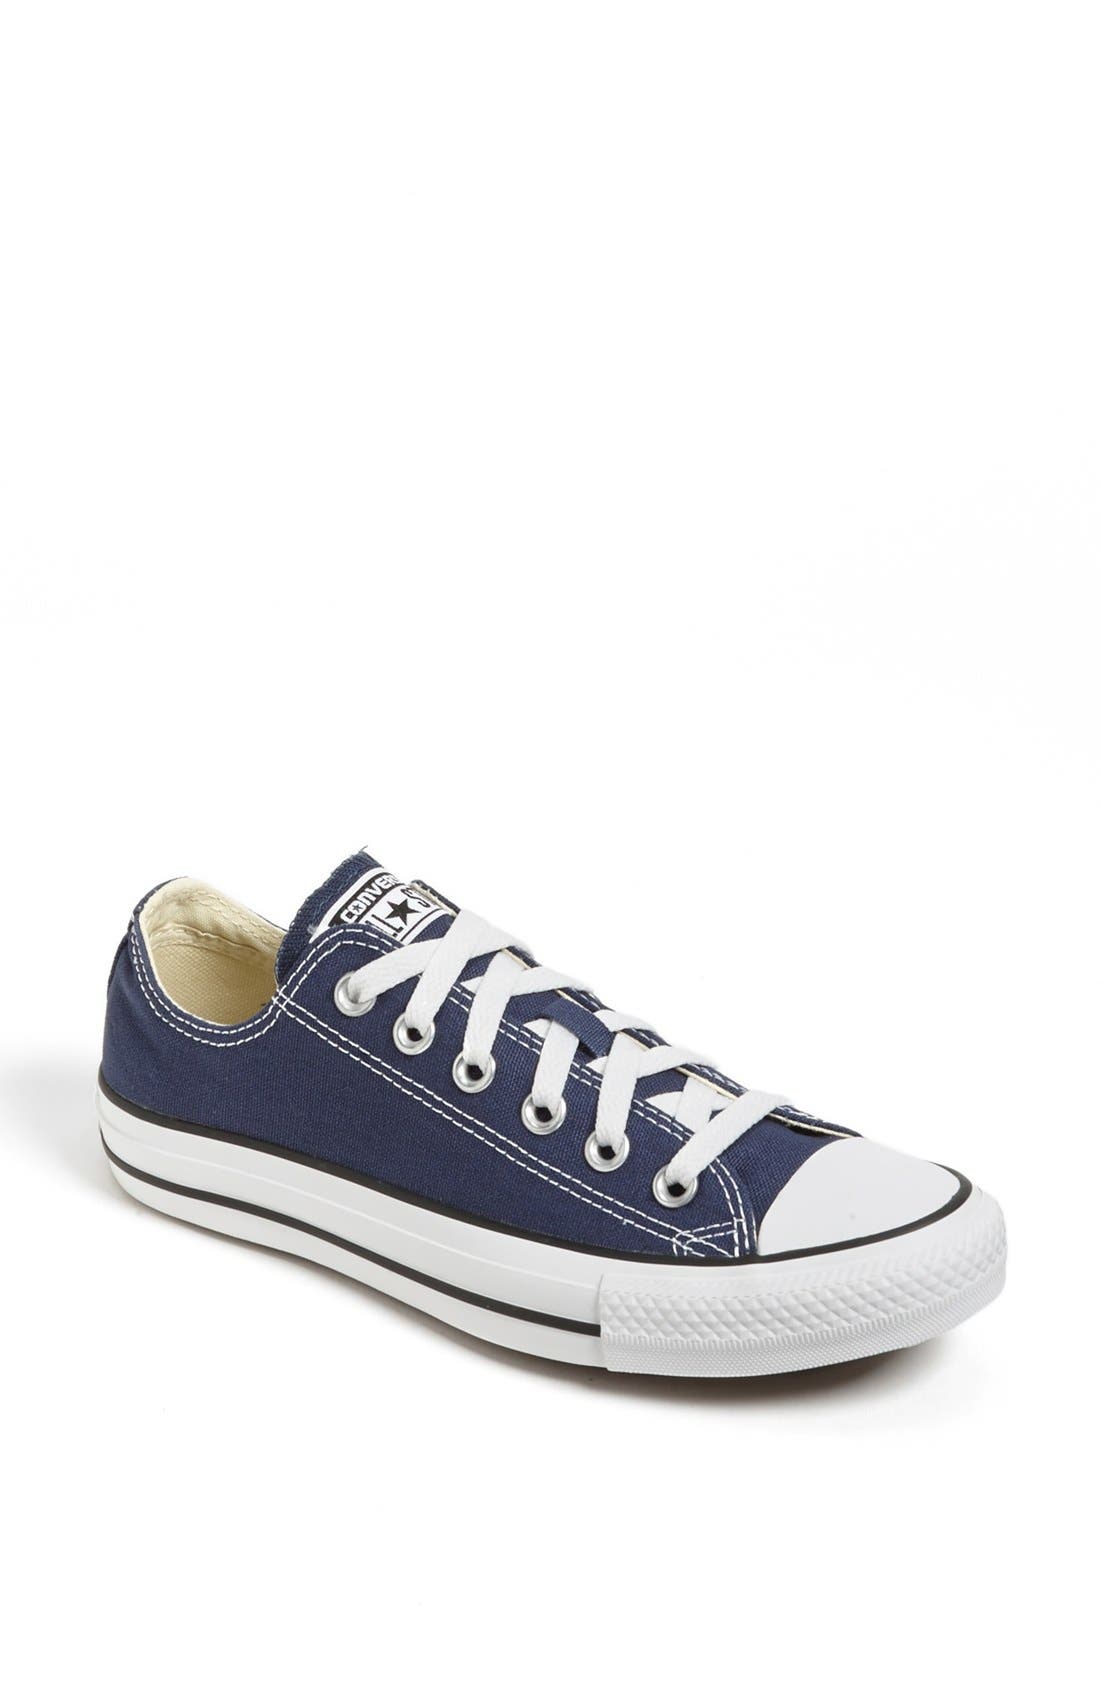 UPC 022866822893 product image for Women's Converse Chuck Taylor Low Top Sneaker, Size 9.5 M - Blue | upcitemdb.com